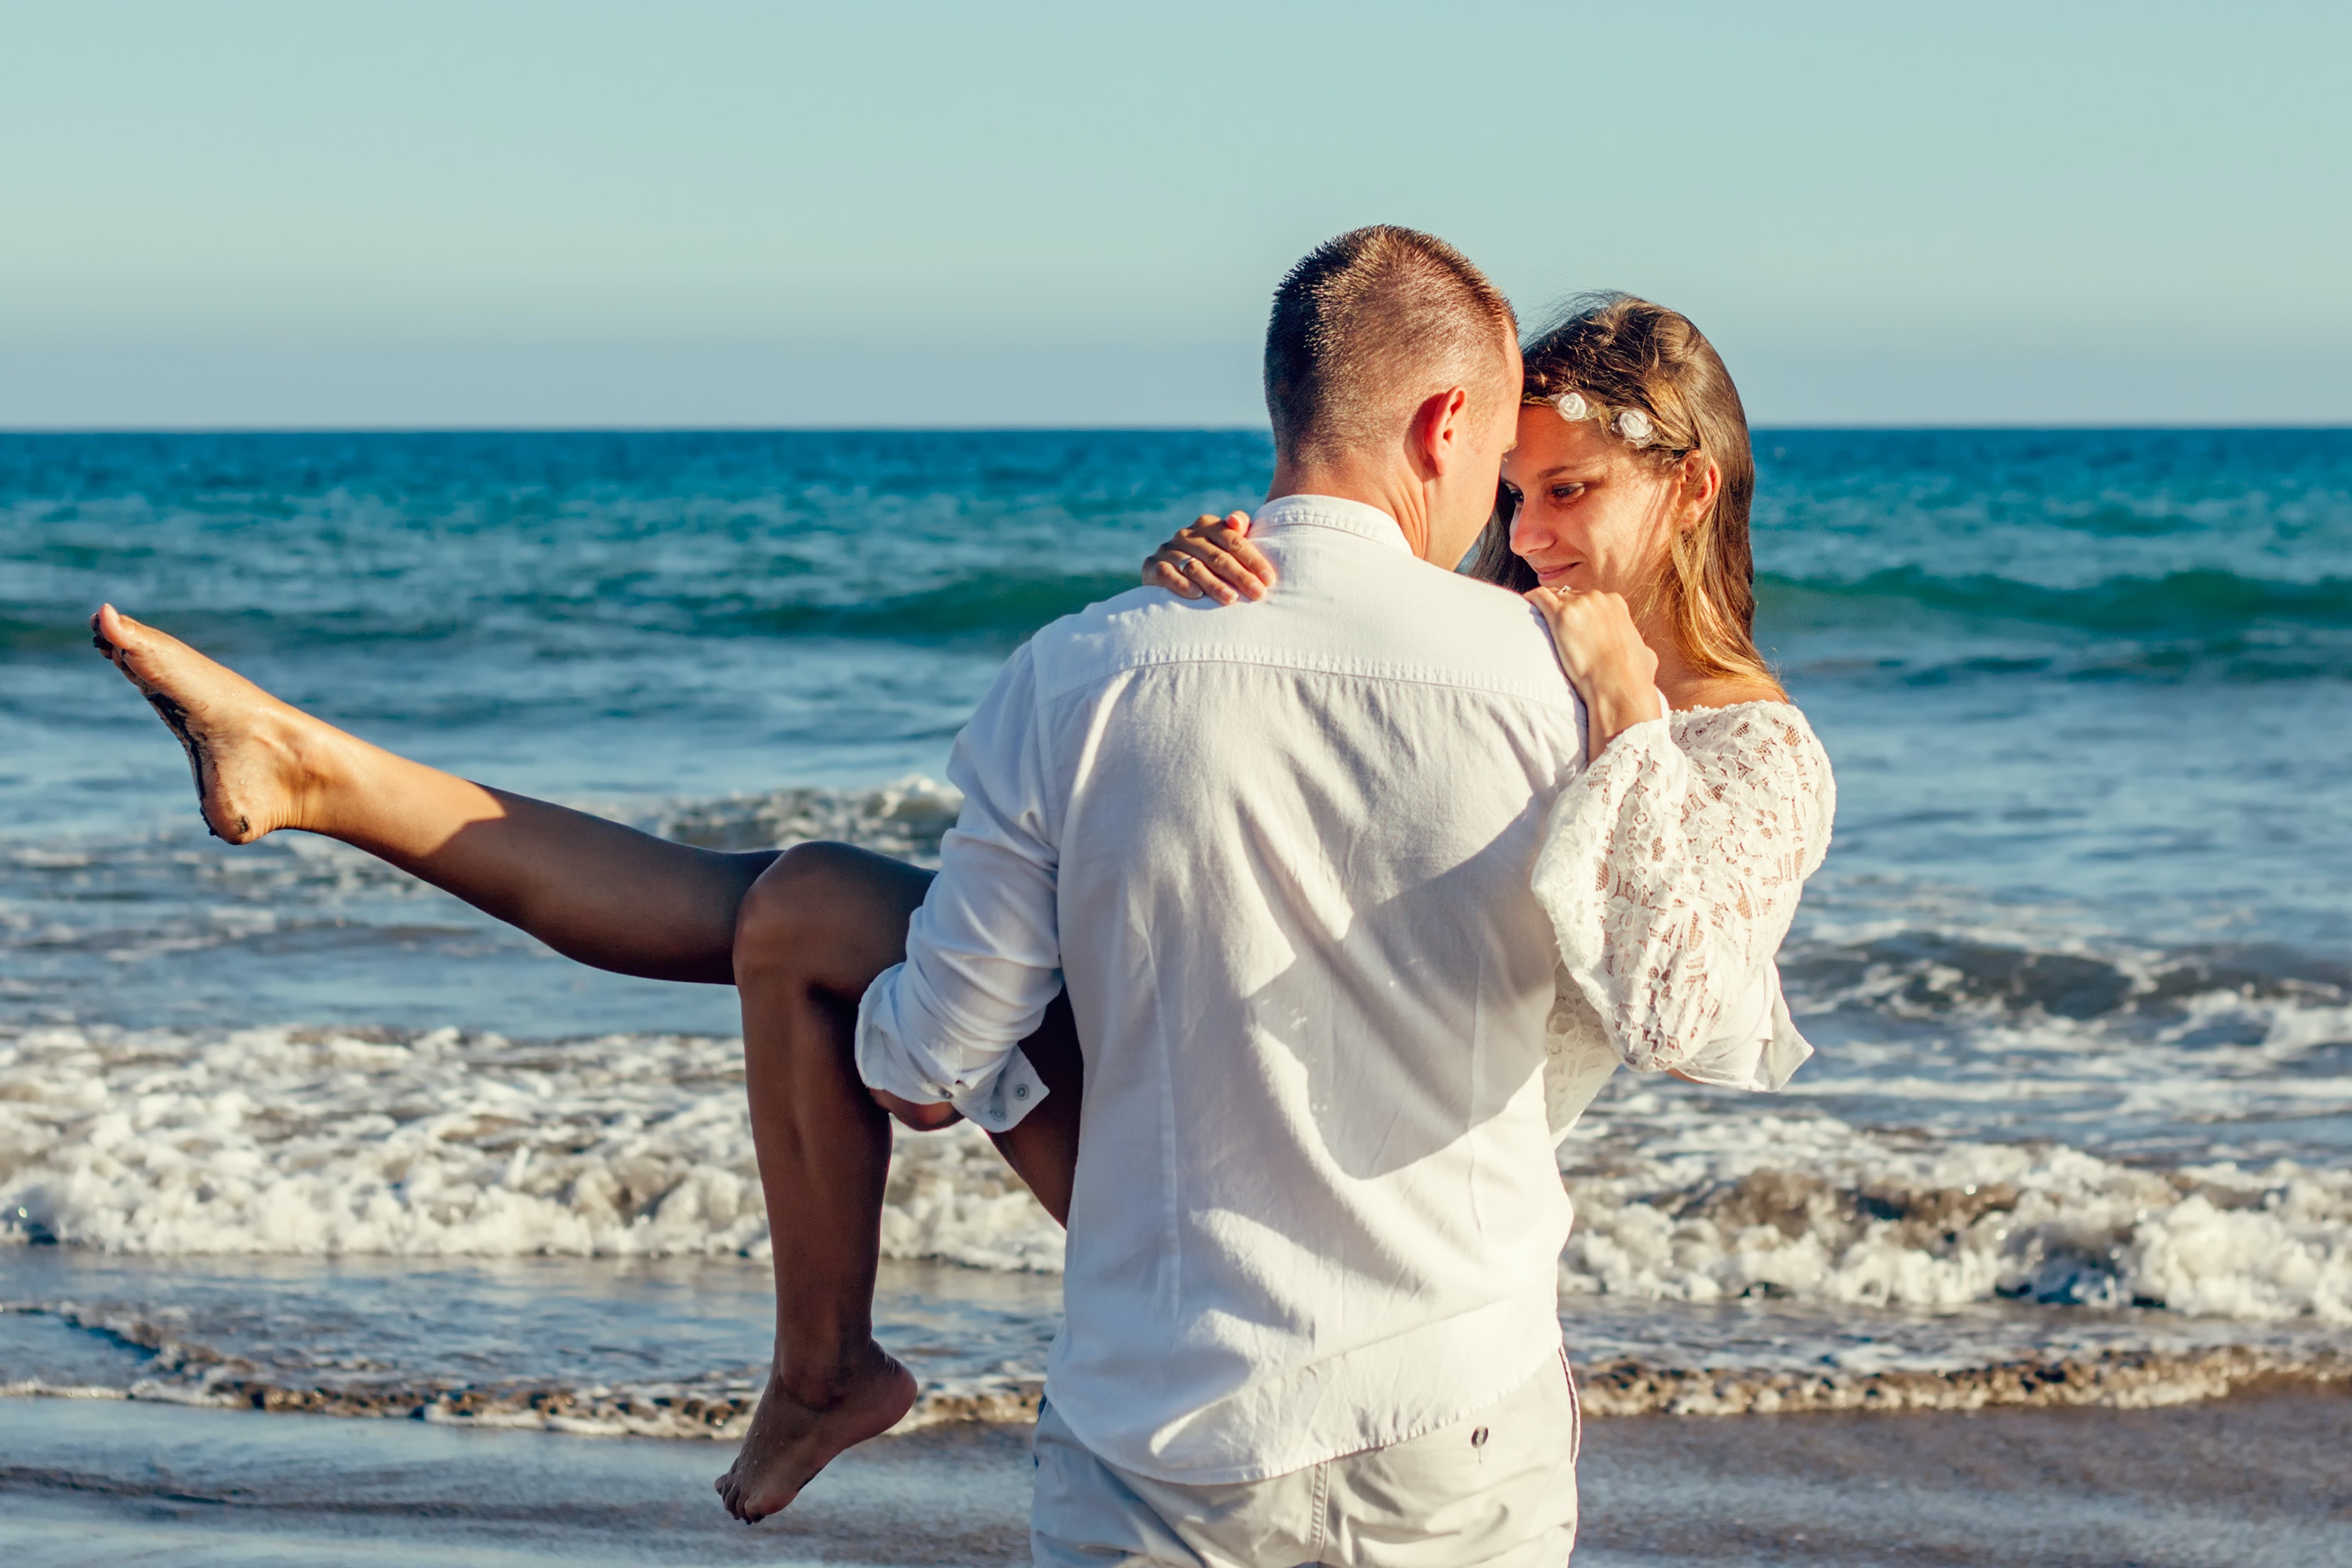 Man carrying woman in front of the beach. | Source: Pexels